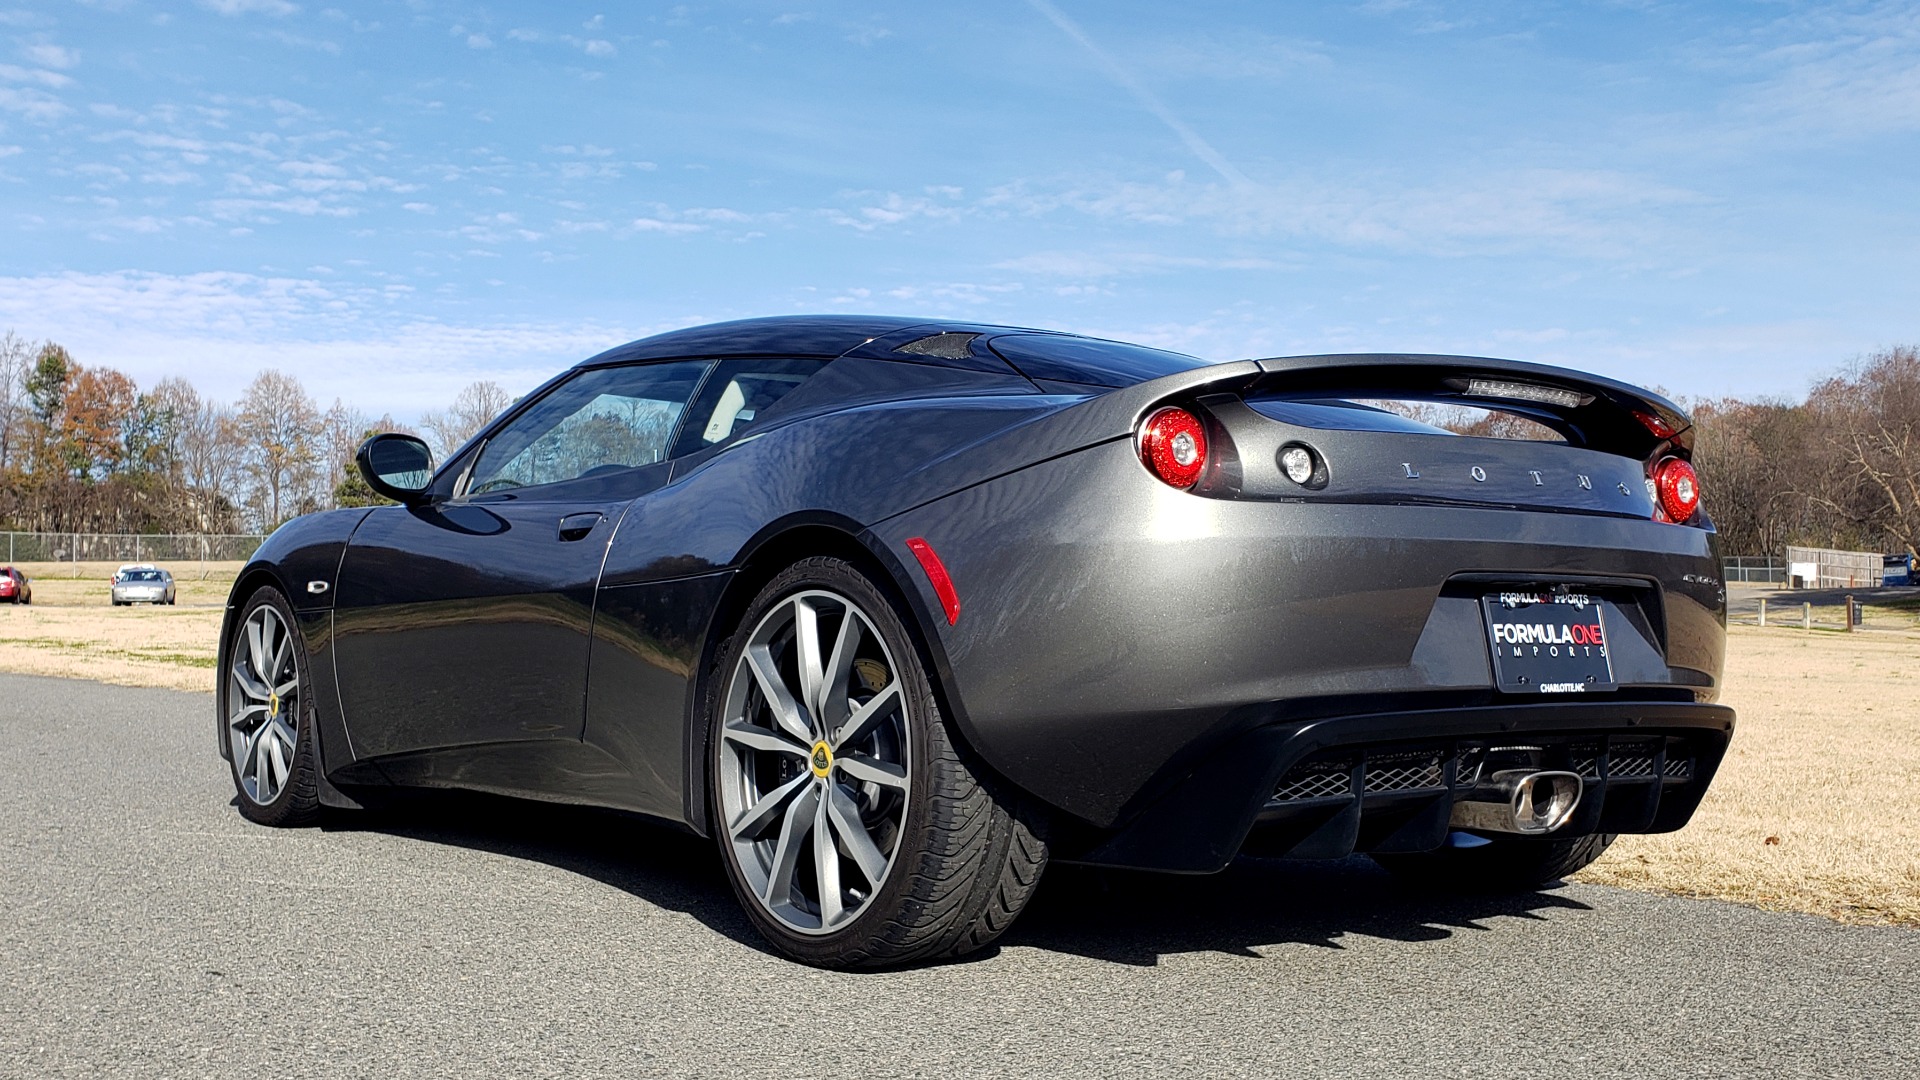 Used 2011 Lotus EVORA S 2+2 / 3.5L V6 / 6-SPD MANUAL / PIONEER / REARVIEW / LOW MILES for sale Sold at Formula Imports in Charlotte NC 28227 6